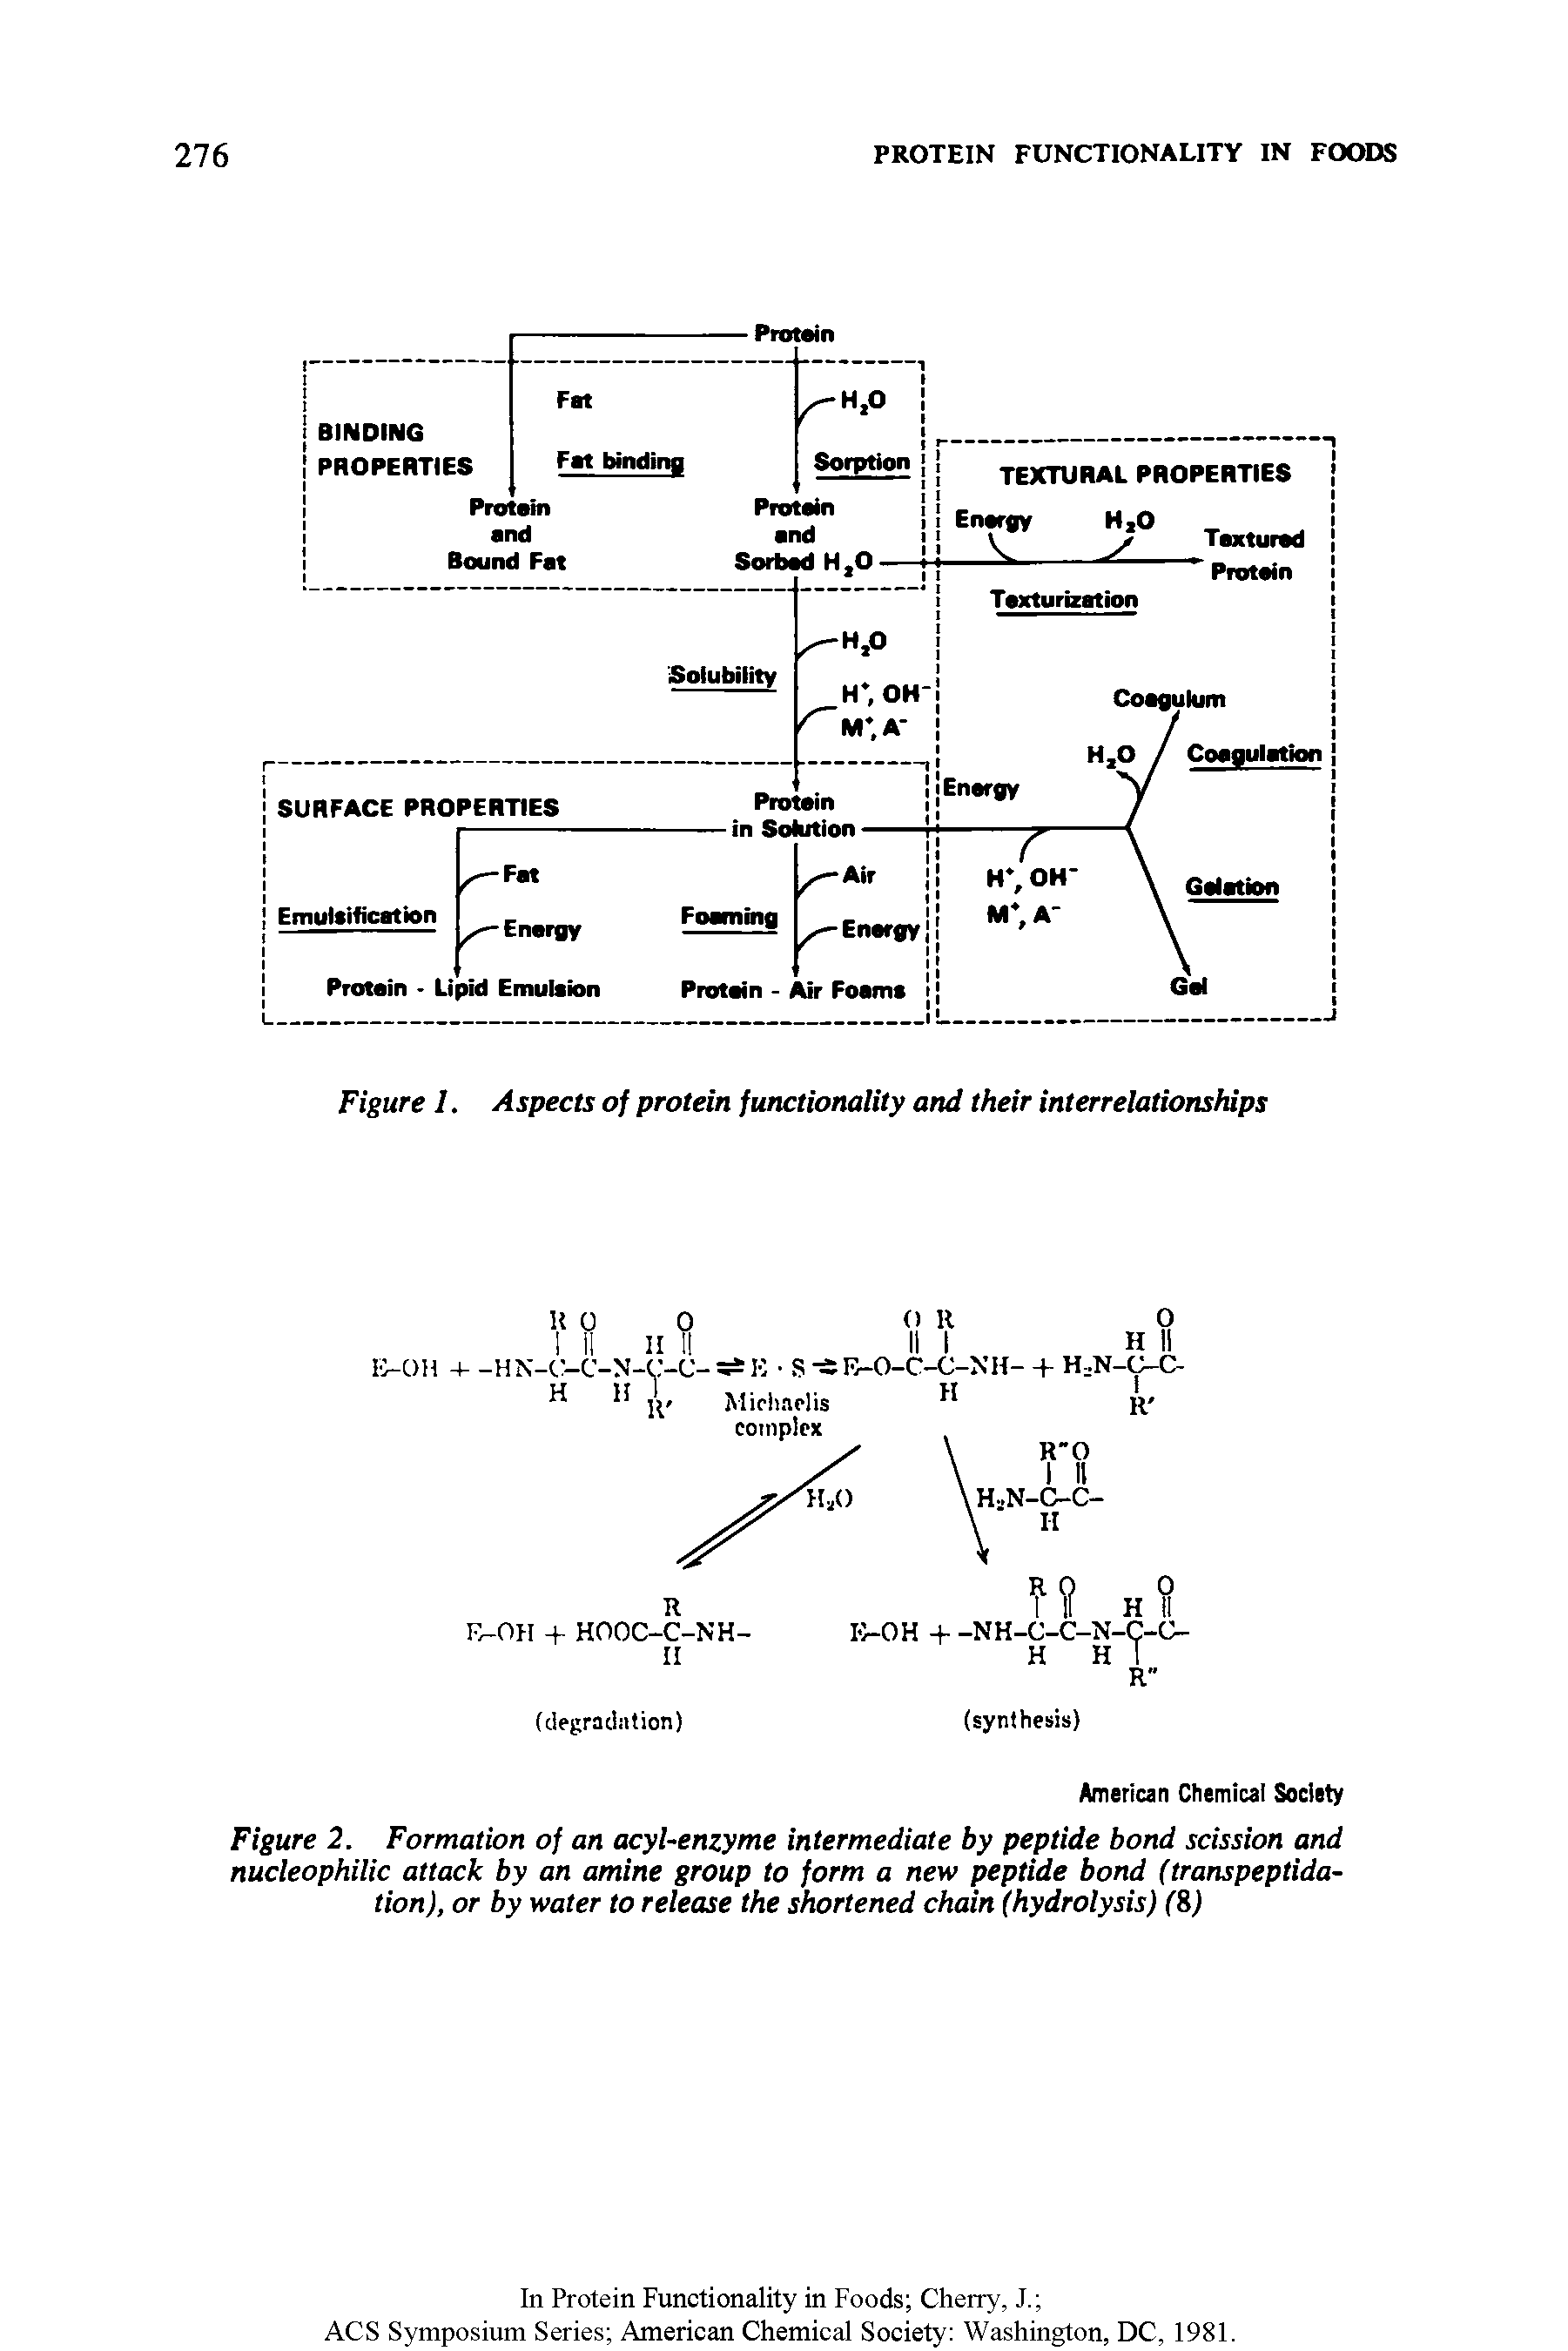 Figure 2. Formation of an acyl-enzyme intermediate by peptide bond scission and nucleophilic attack by an amine group to form a new peptide bond (transpeptida-tion), or by water to release the shortened chain (hydrolysis) ( )...